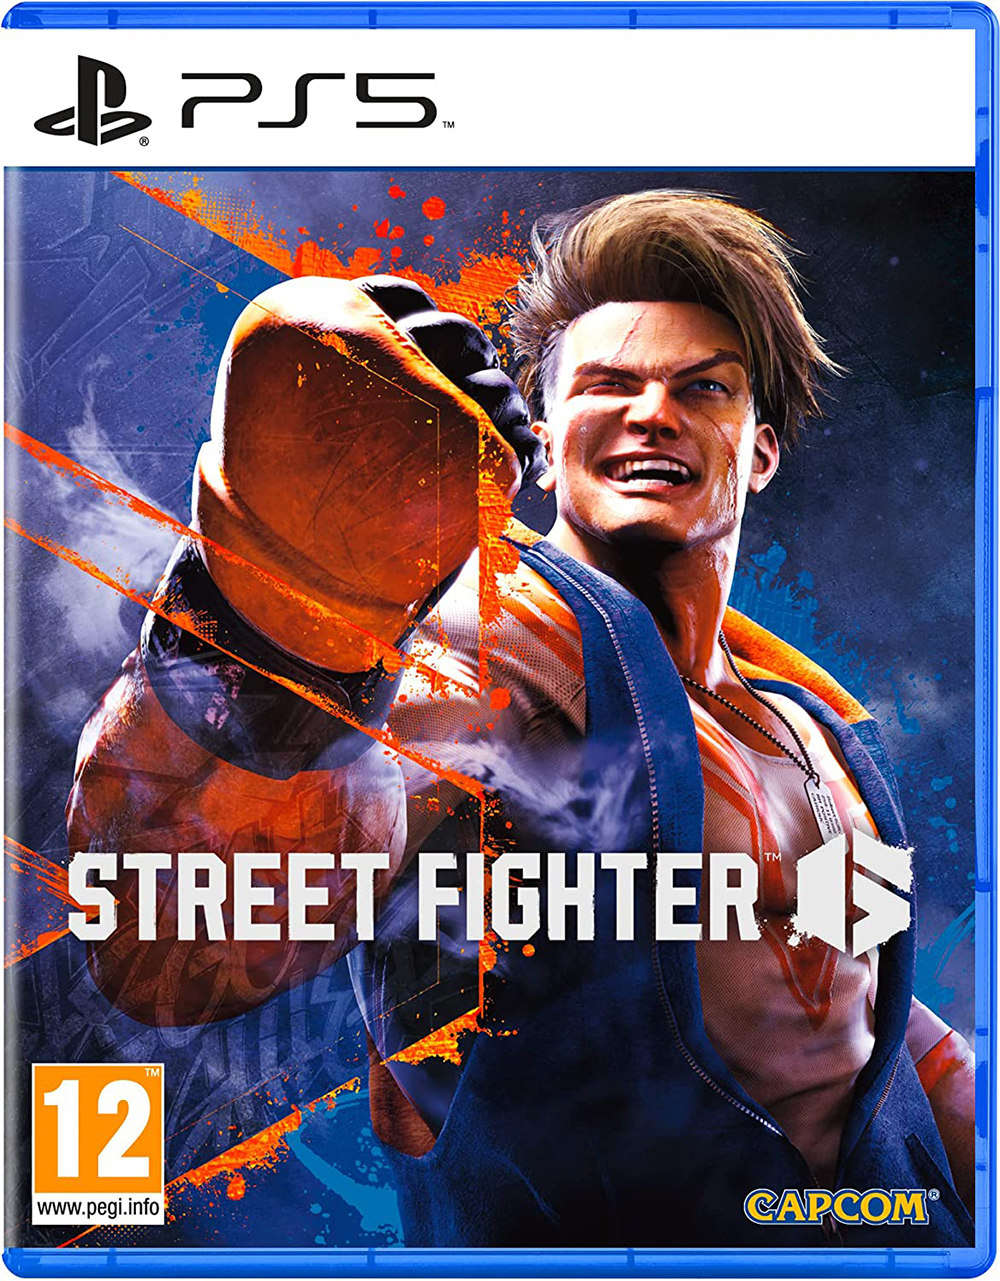 Street Fighter 6 character reveals leaked early by Capcom Germany